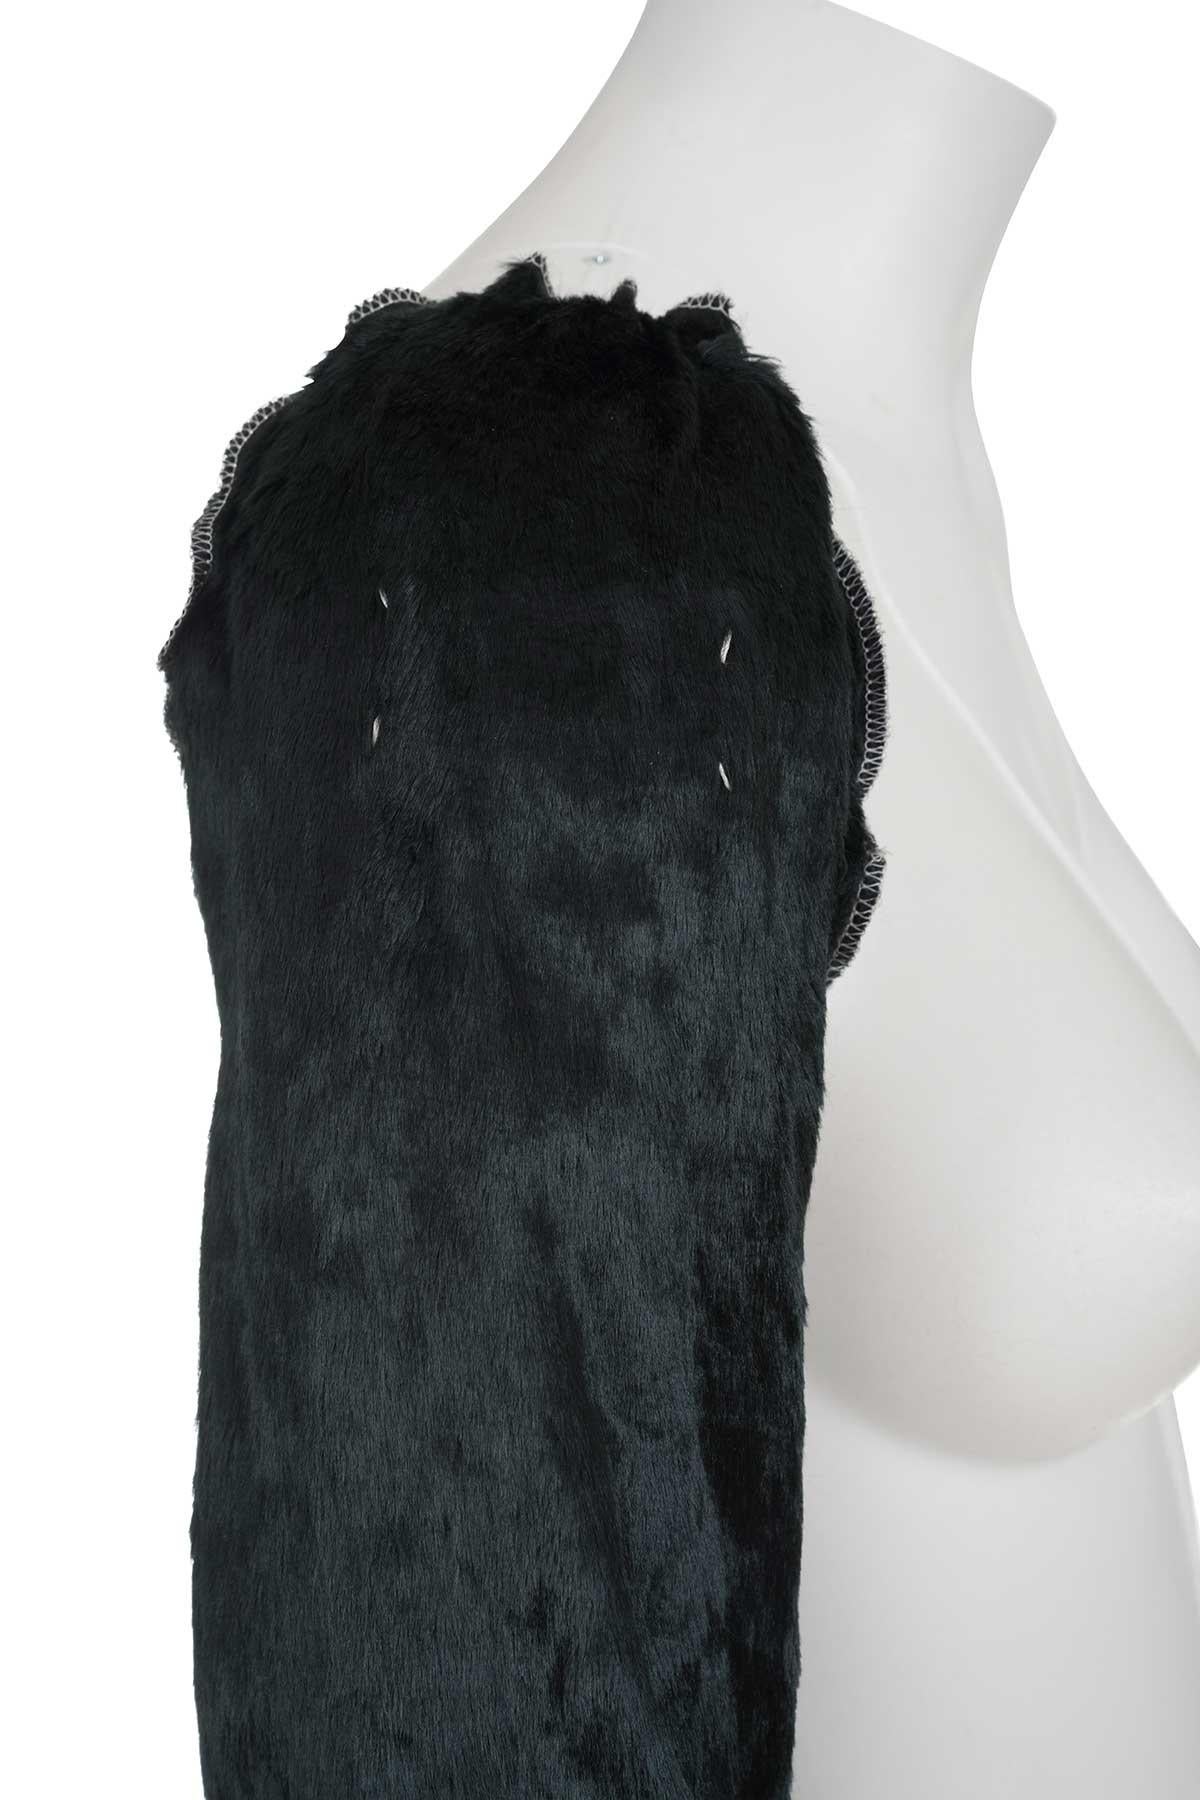 Women's or Men's MAISON MARTIN MARGIELA FW 97 Iconic and Rare Fake Fur Sleeves For Sale